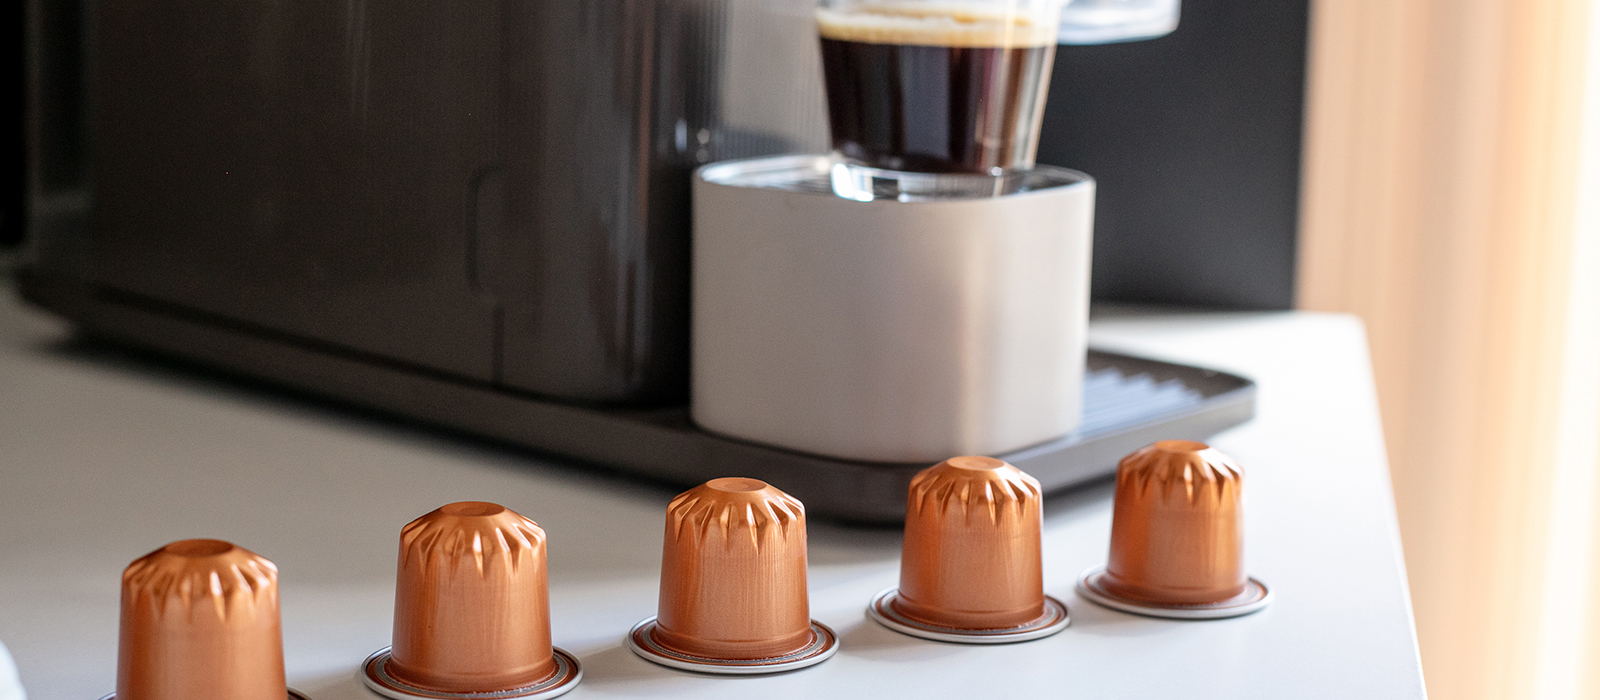 Nespresso® pods or compatible capsules : Which one to choose?